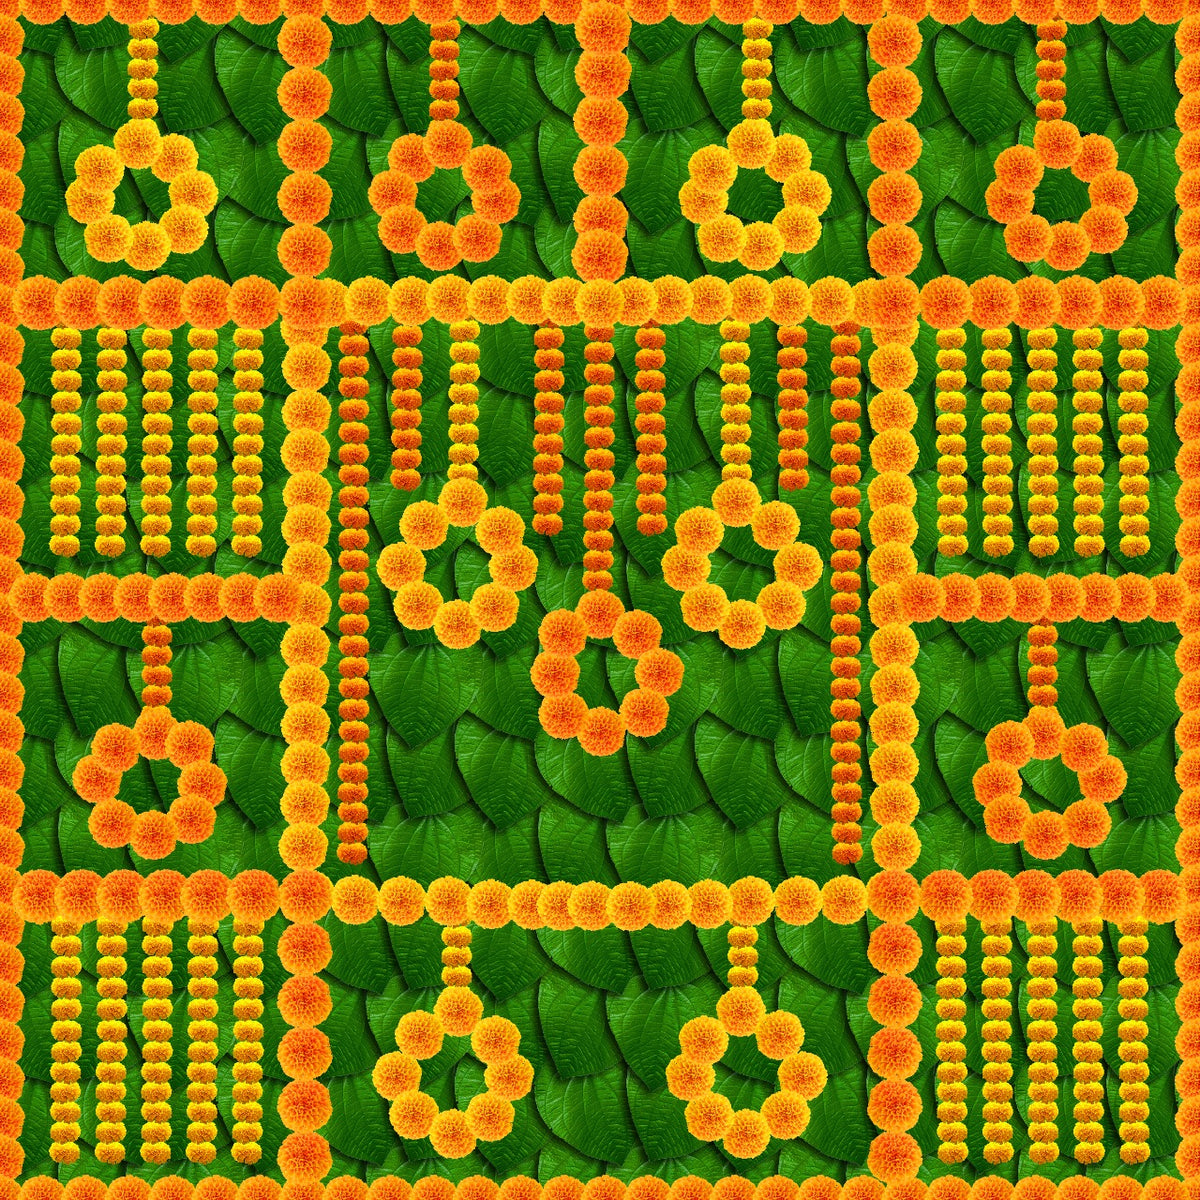 South Indian Backdrop: Texture of Banana leaf with marigold flower patterns